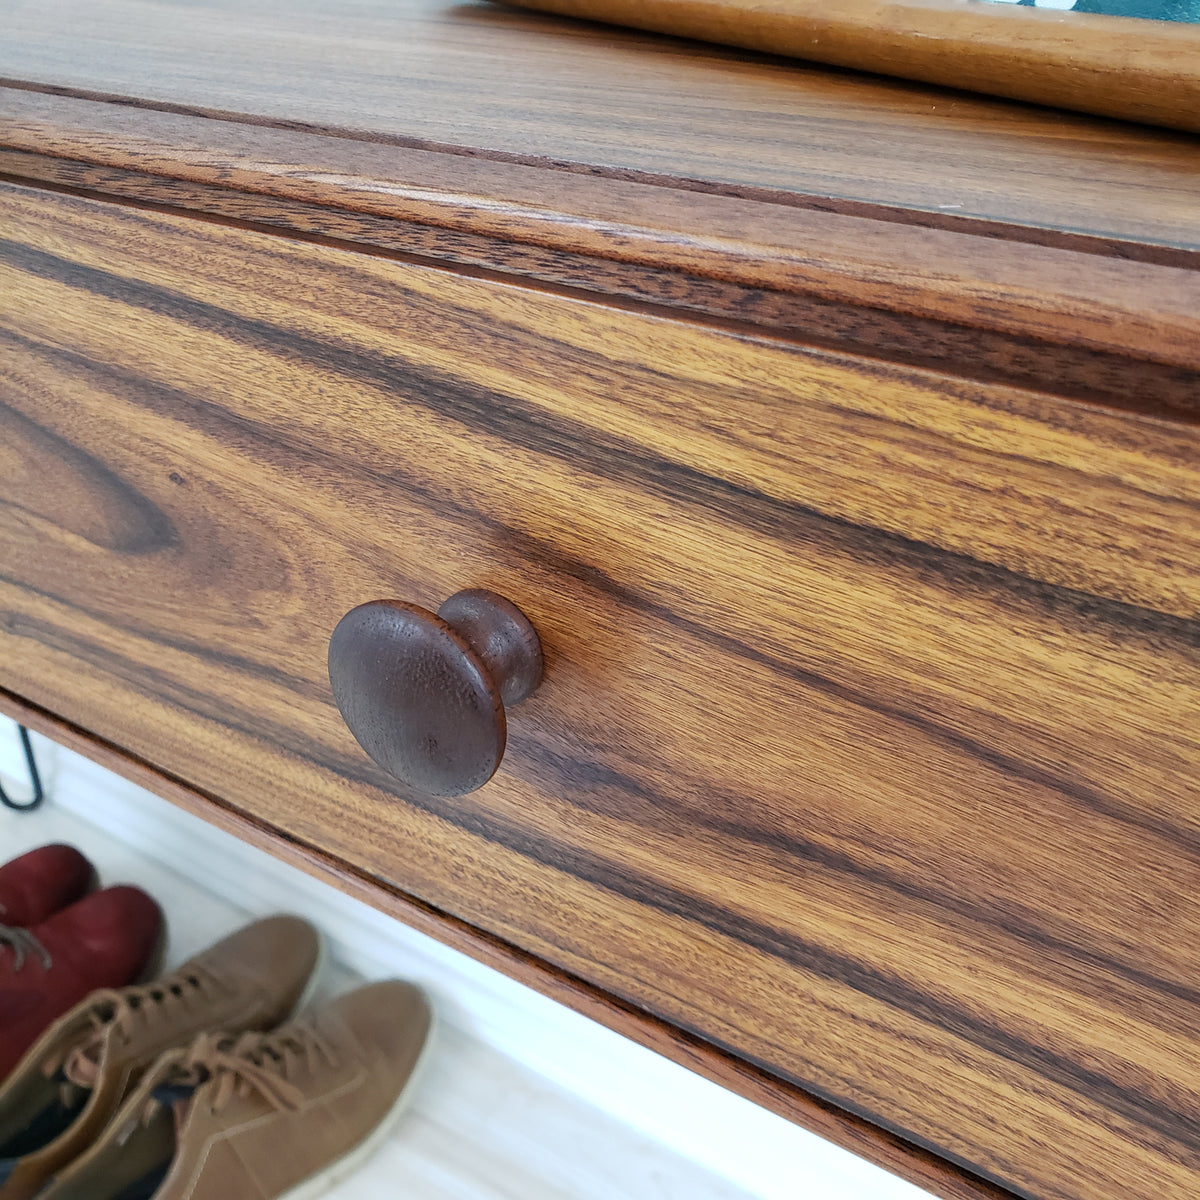 Vintage Rosewood Console on Hairpin Legs